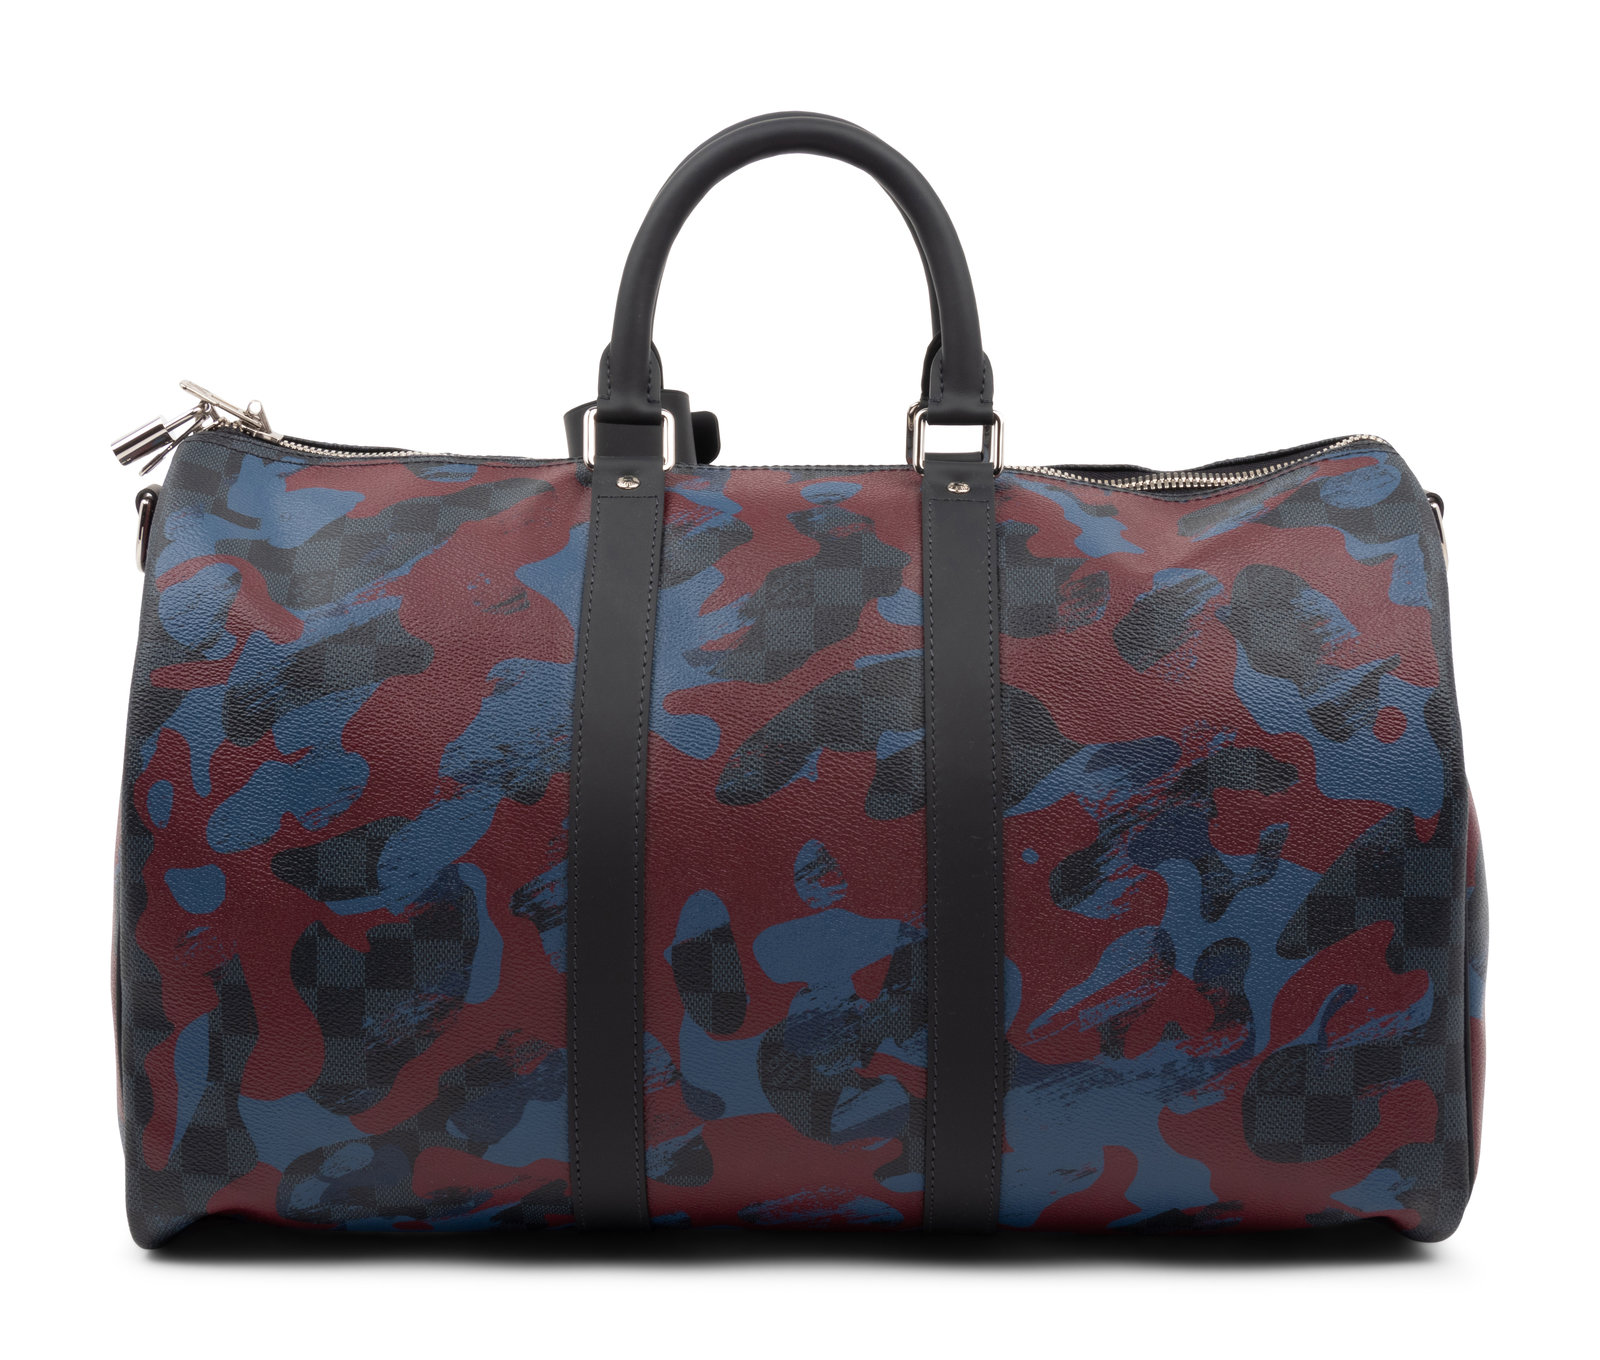 Louis Vuitton Camouflage luggage.